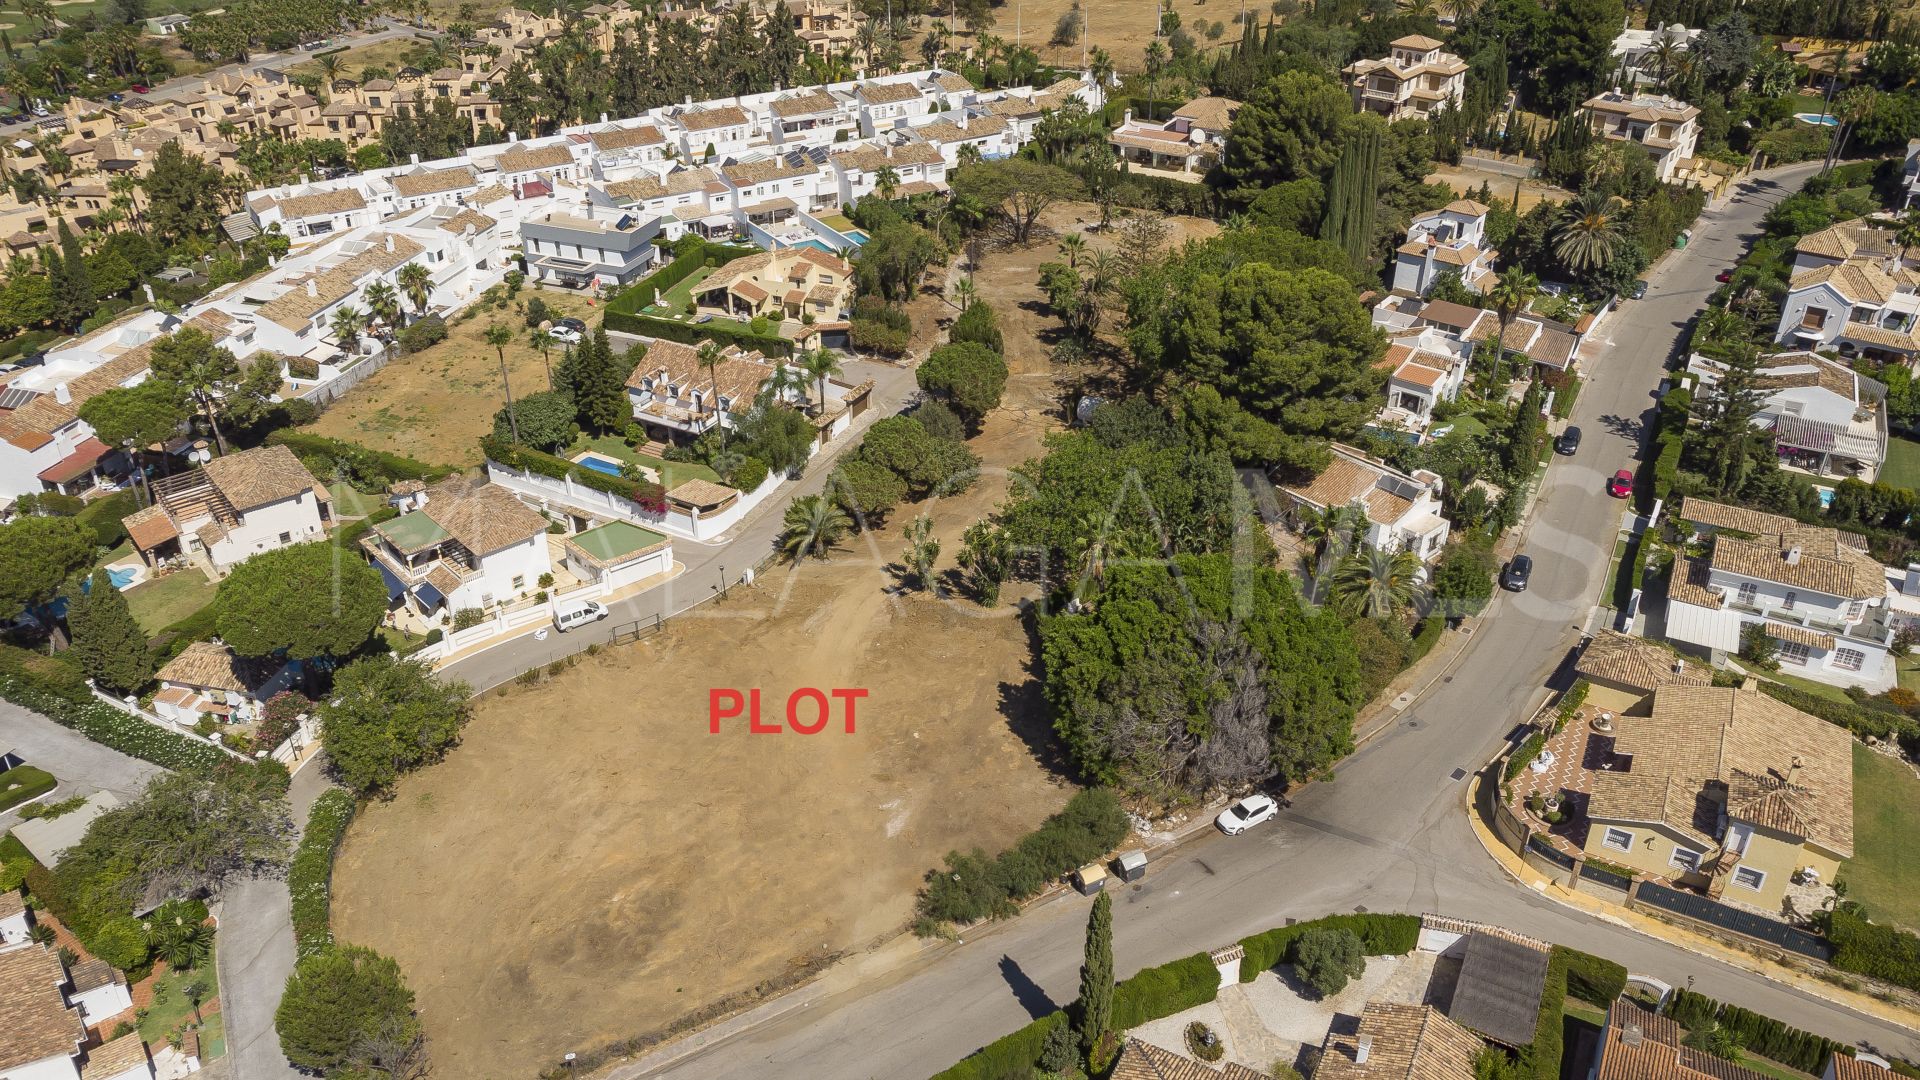 Tomt for sale in Atalaya